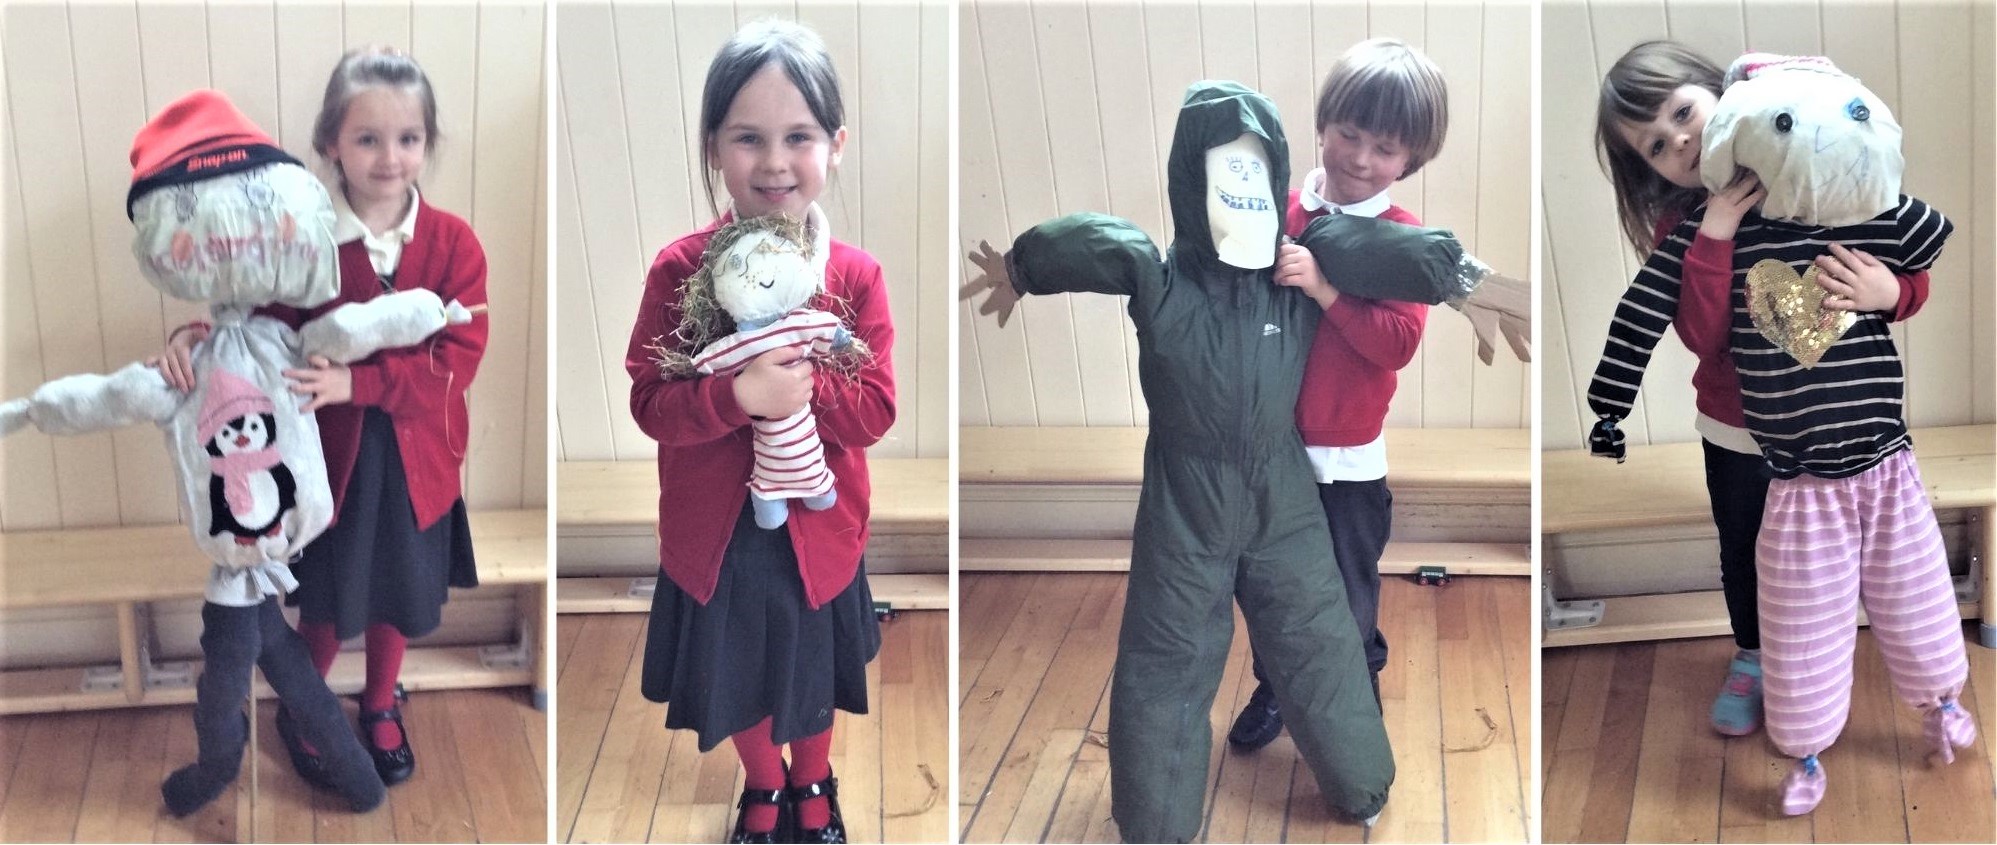 Ysgol Pentre CIW pupils have been using maths to create scarecrows.